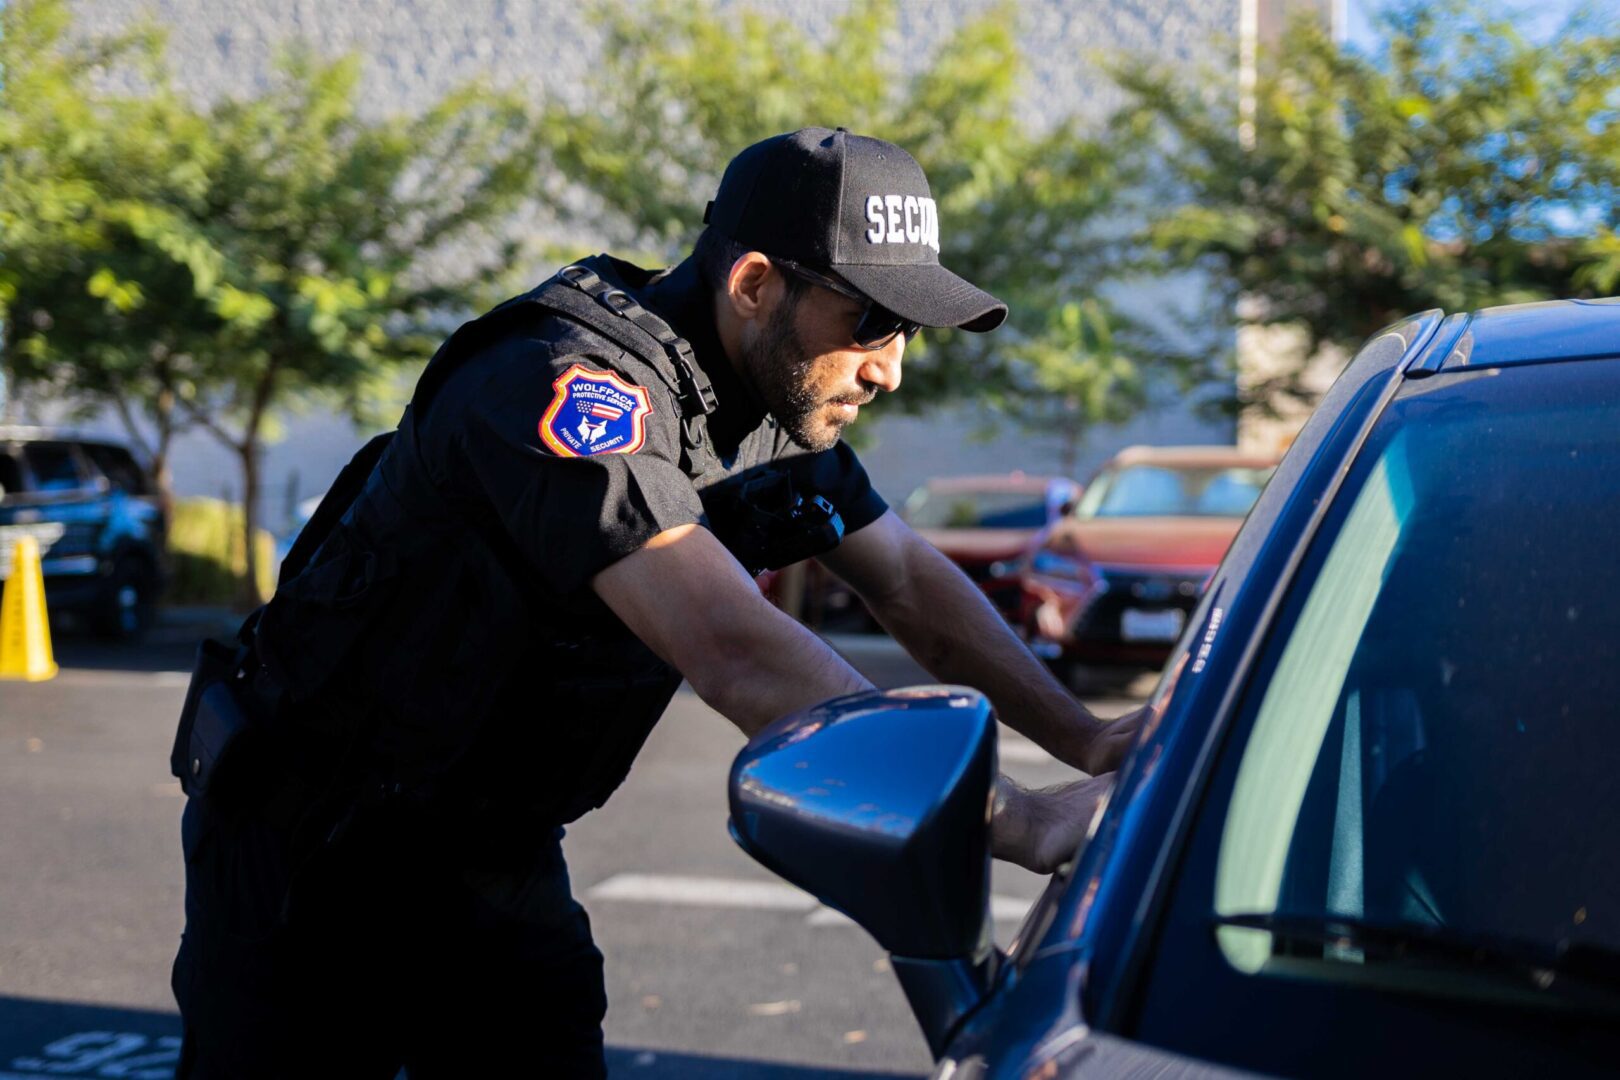 A police officer is looking into the side mirror of his car.